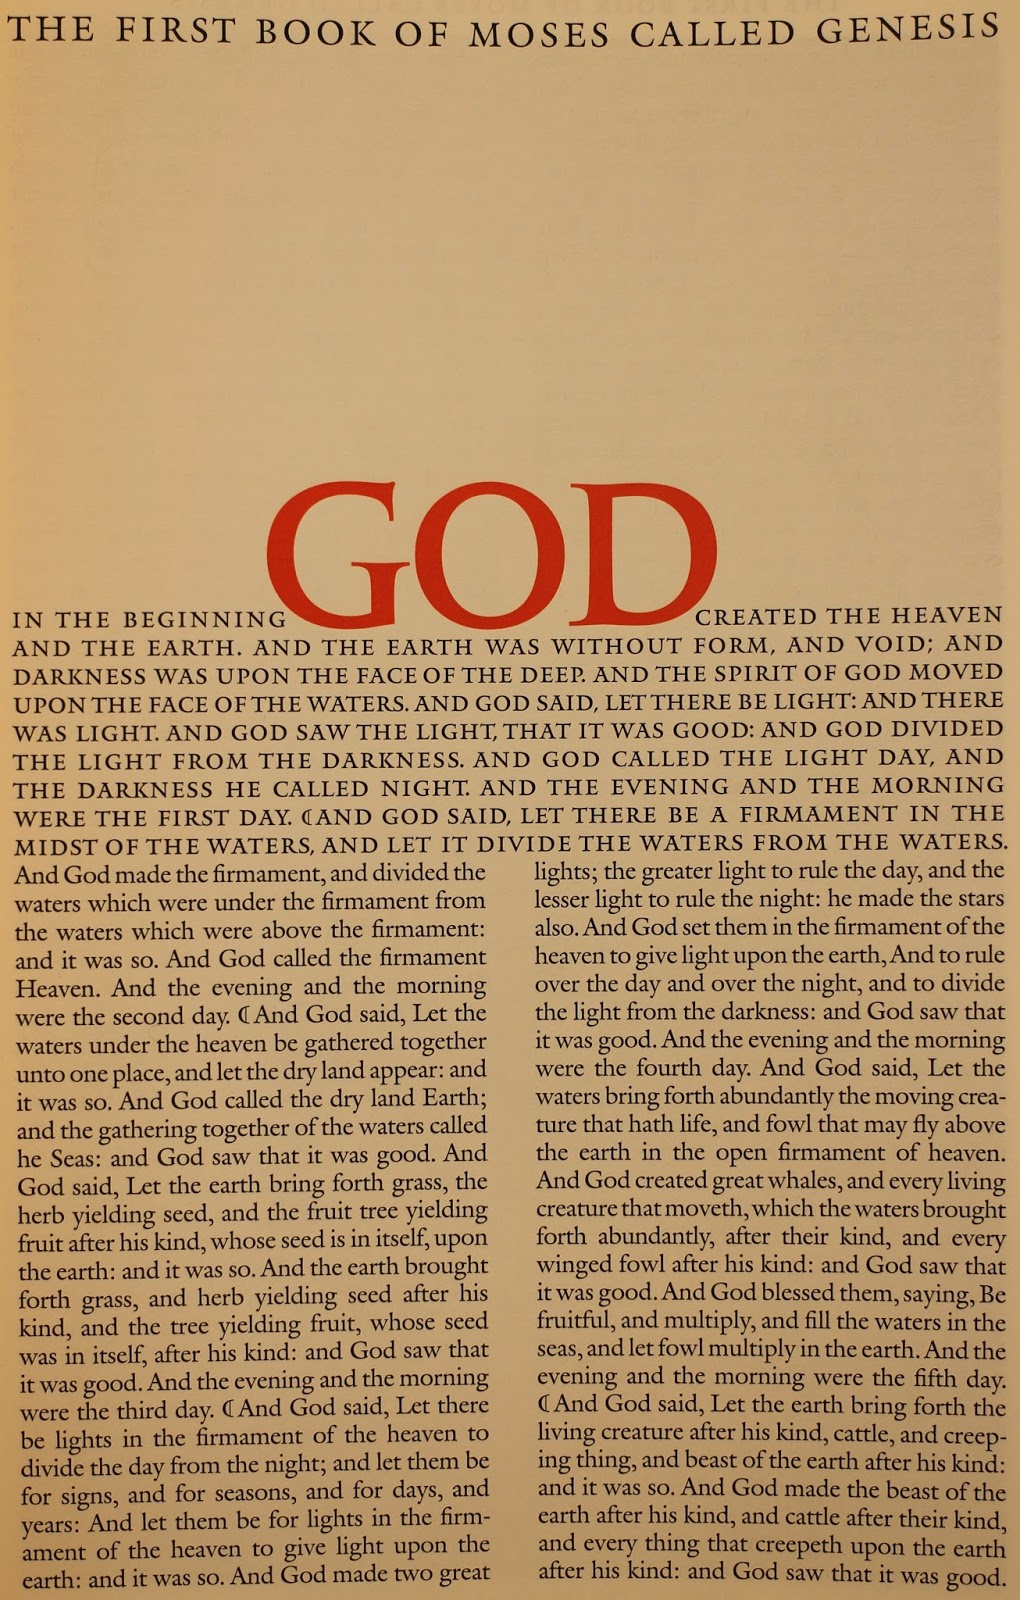 The first page of Genesis with GOD in large red letters next to the rest of the text in small back text.